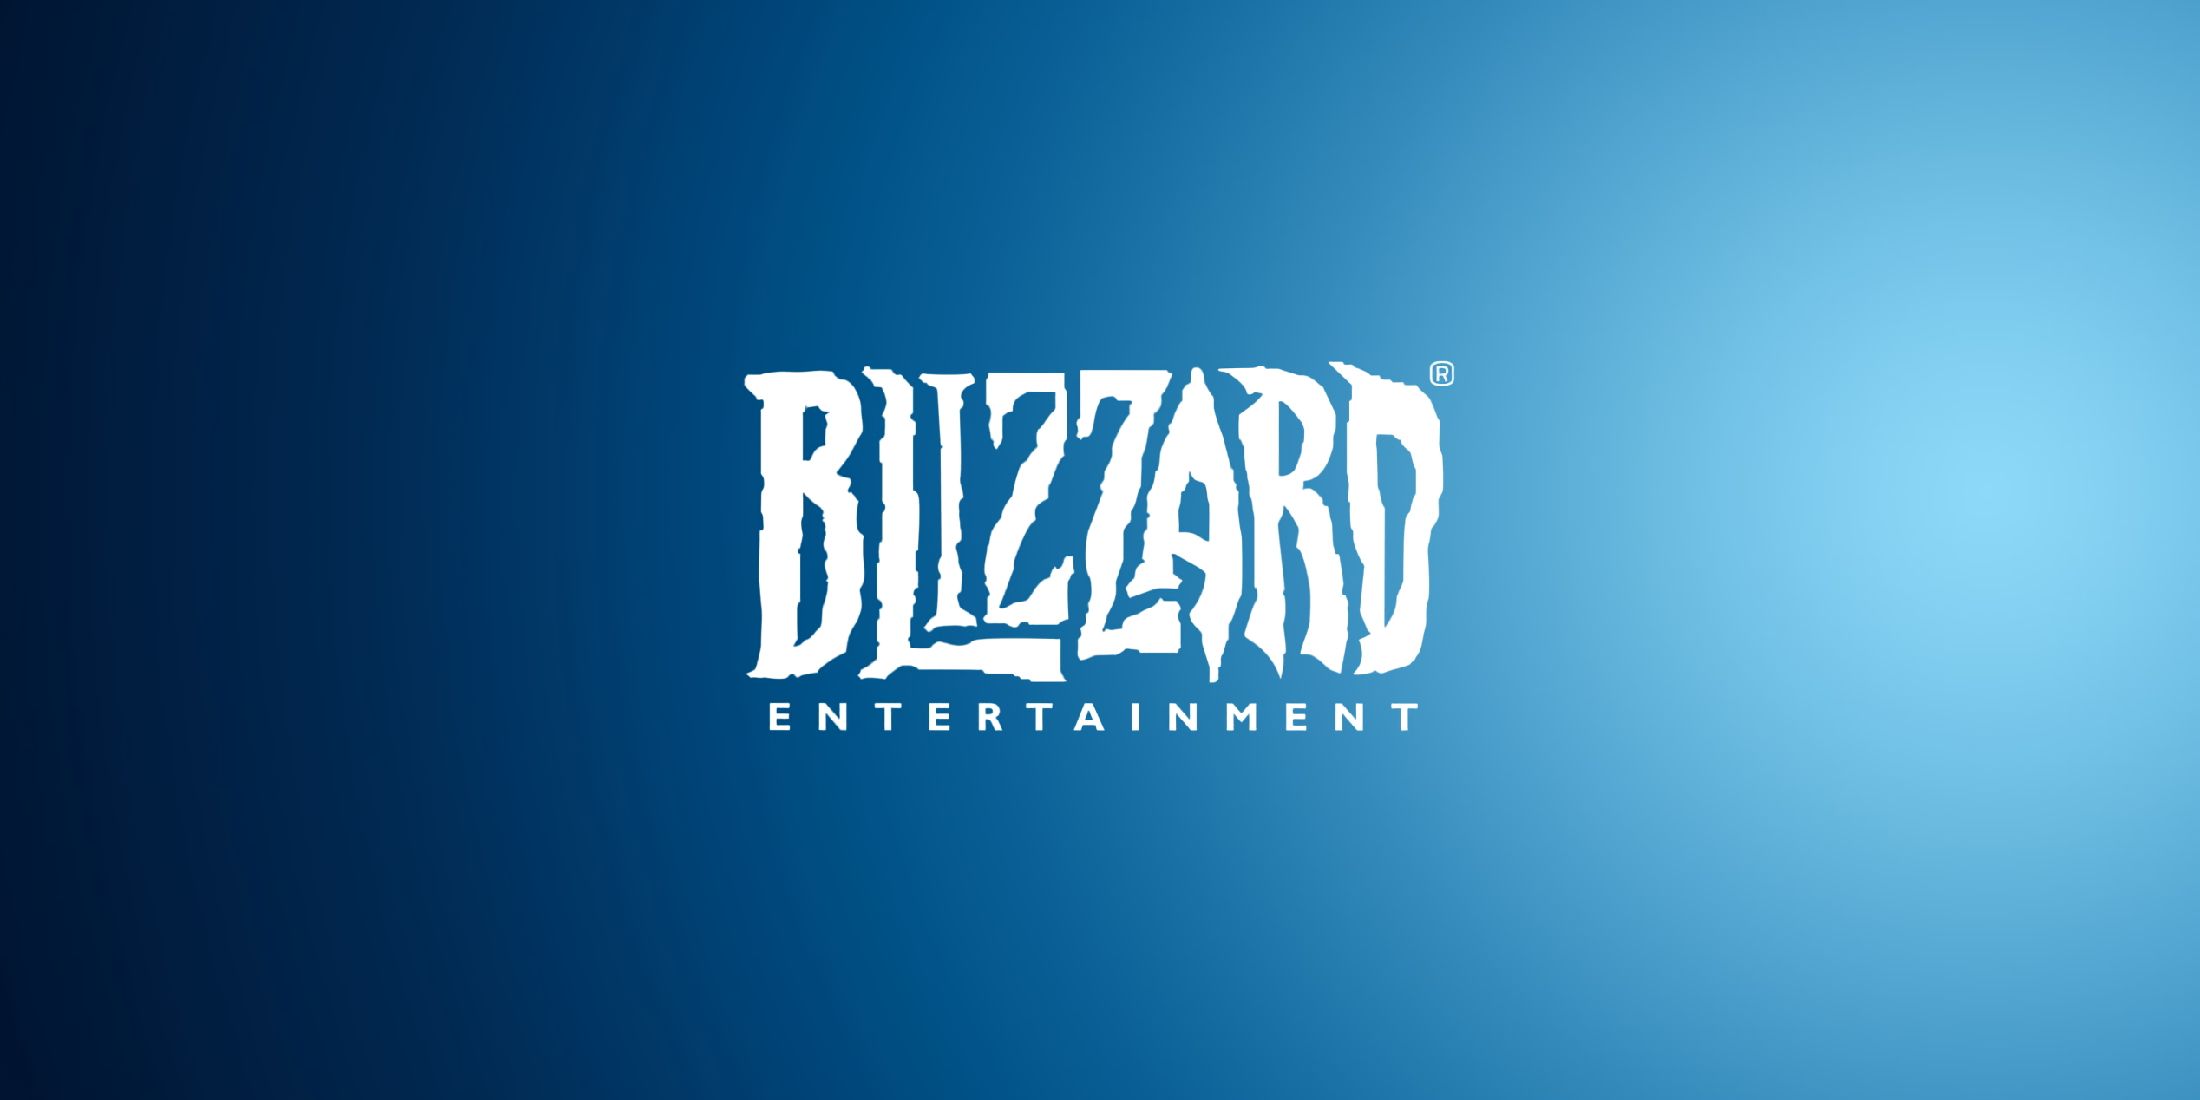 The logo for Blizzard Entertainment in white against a blue gradient background.